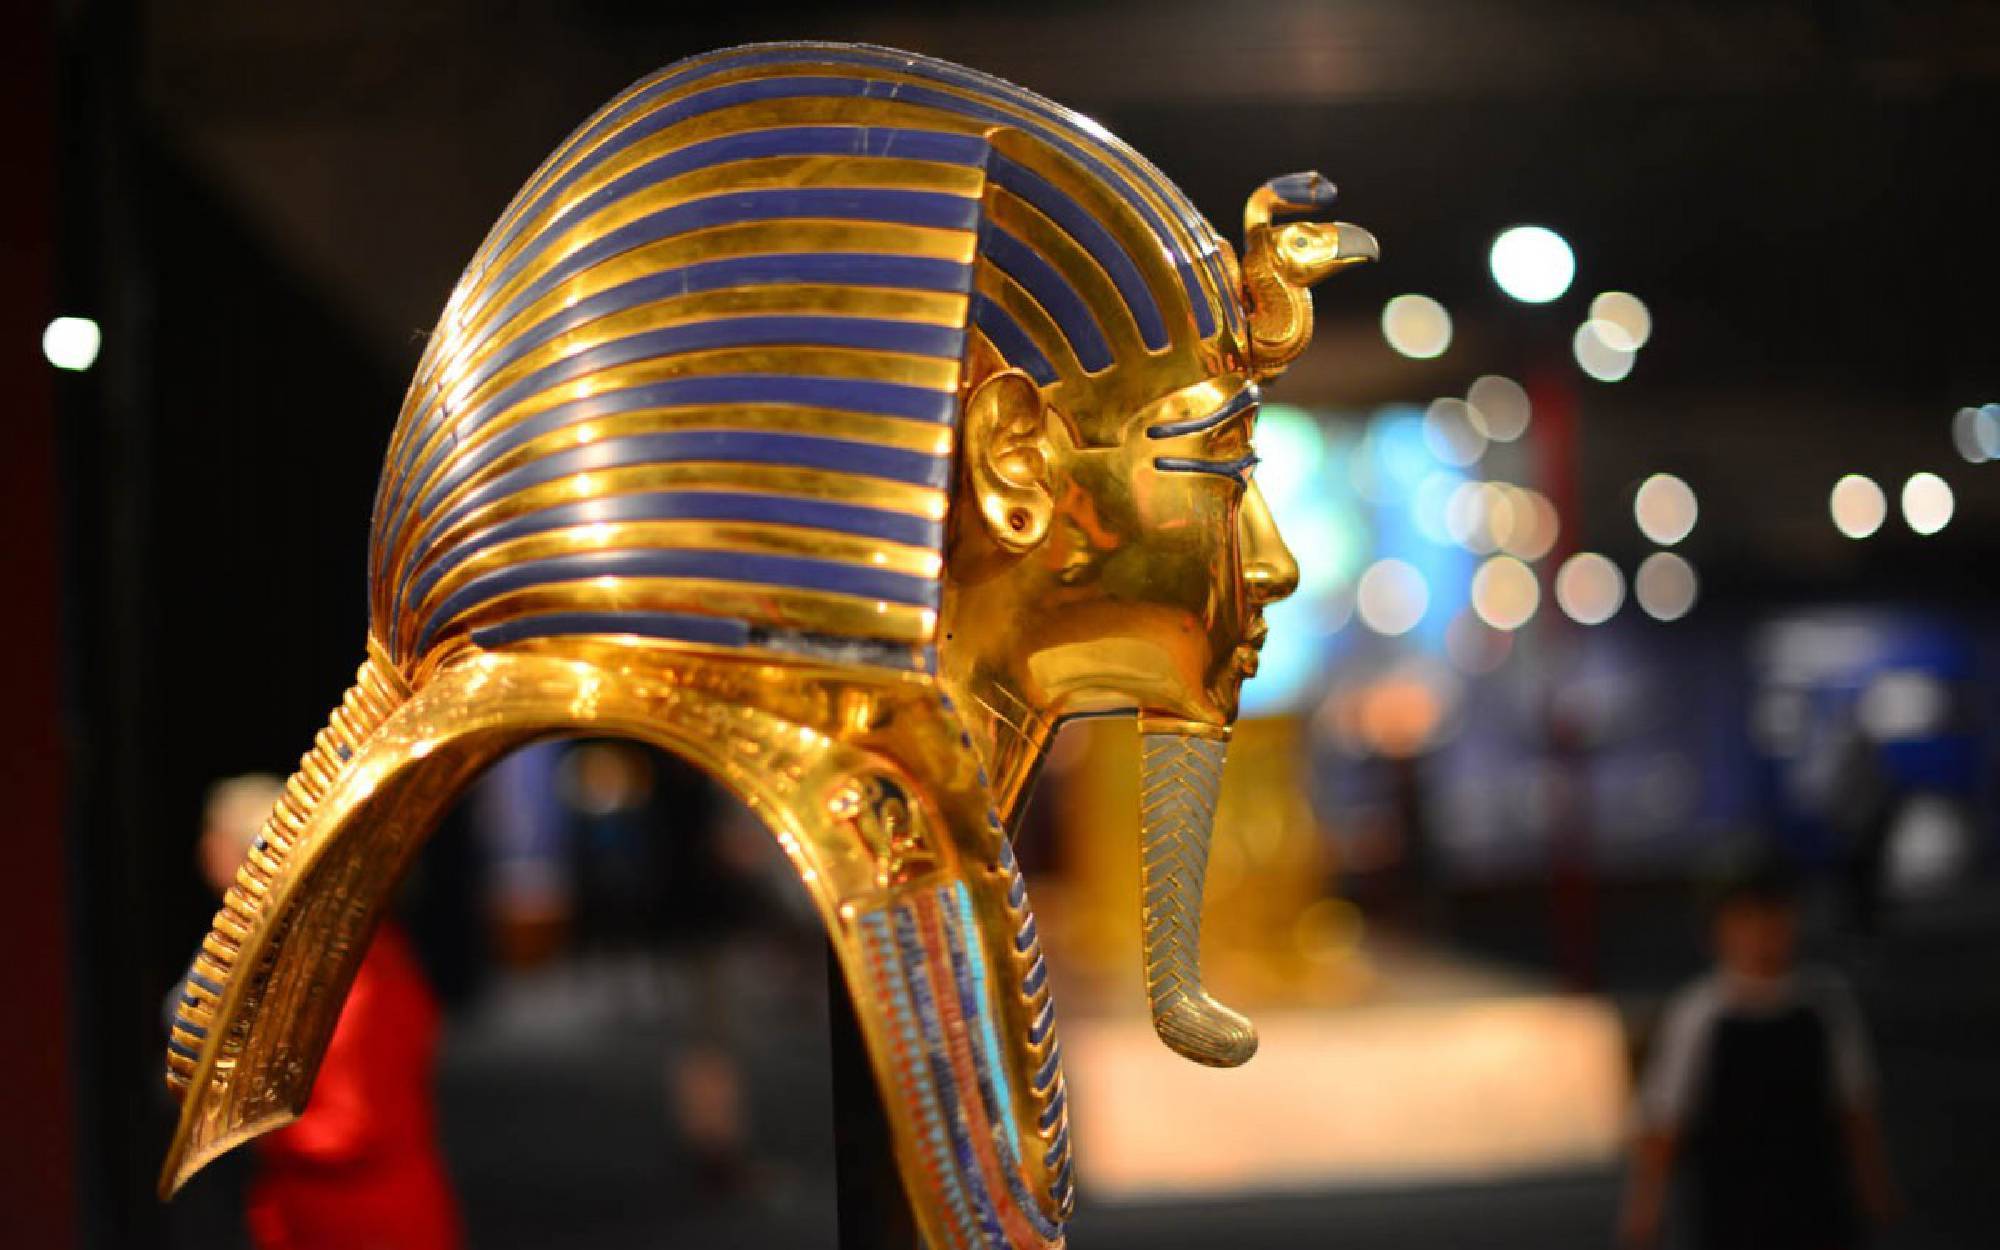 The most famous Egyptian pharaoh today is, without doubt, Tutankhamun.